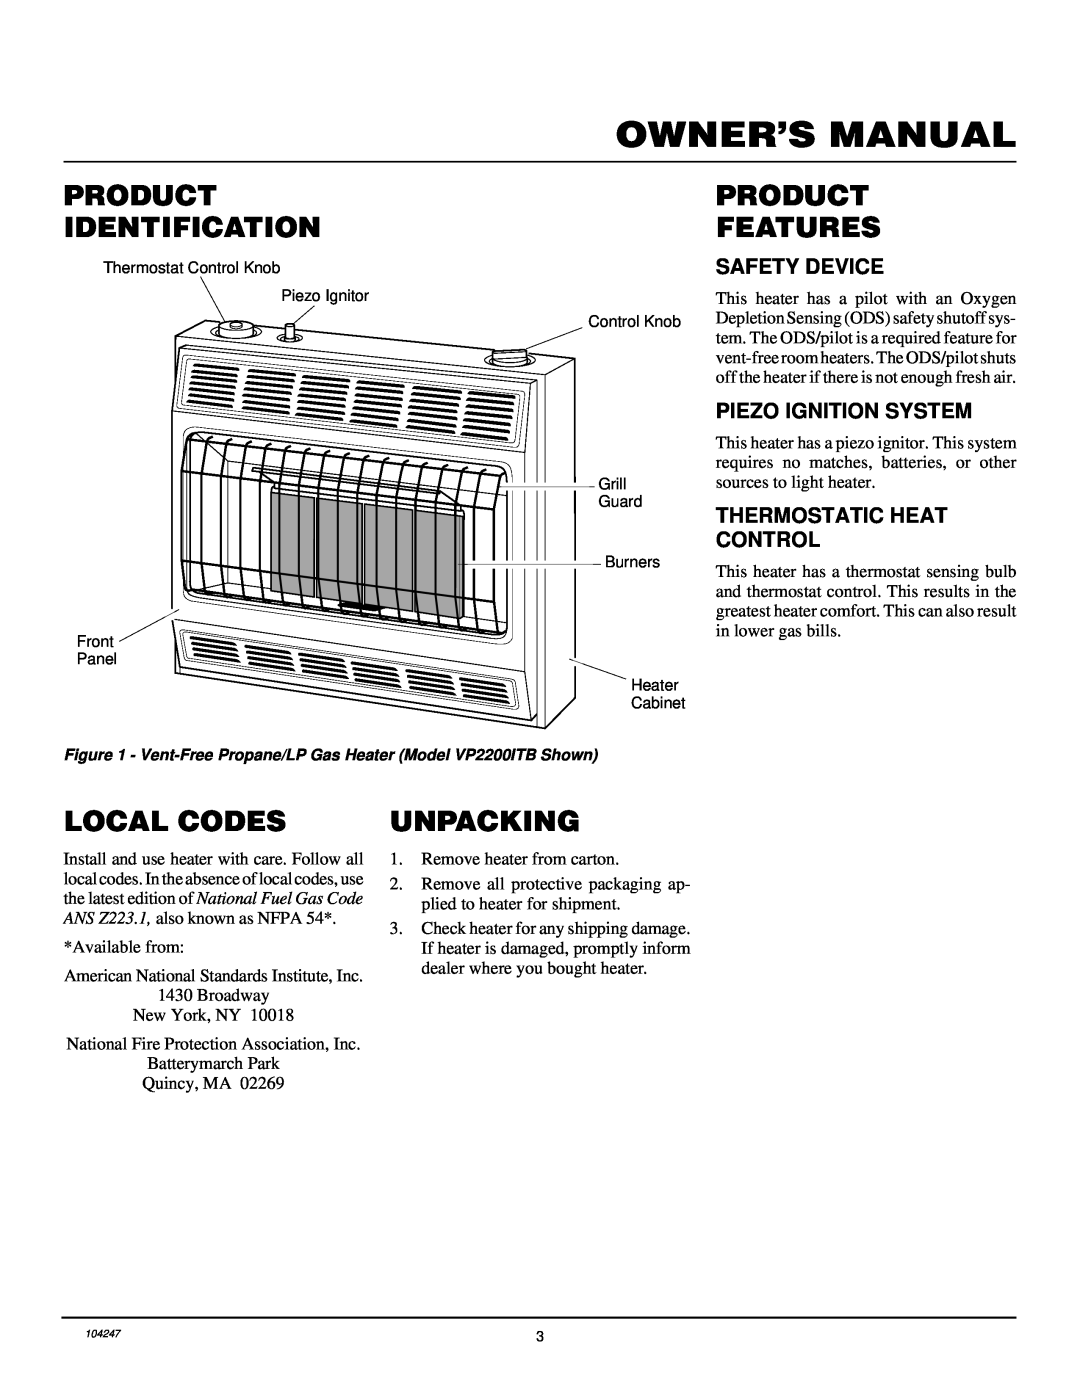 Desa VP1600ITB, VP2200ITB installation manual Product Identification, Product Features, Local Codes, Unpacking 